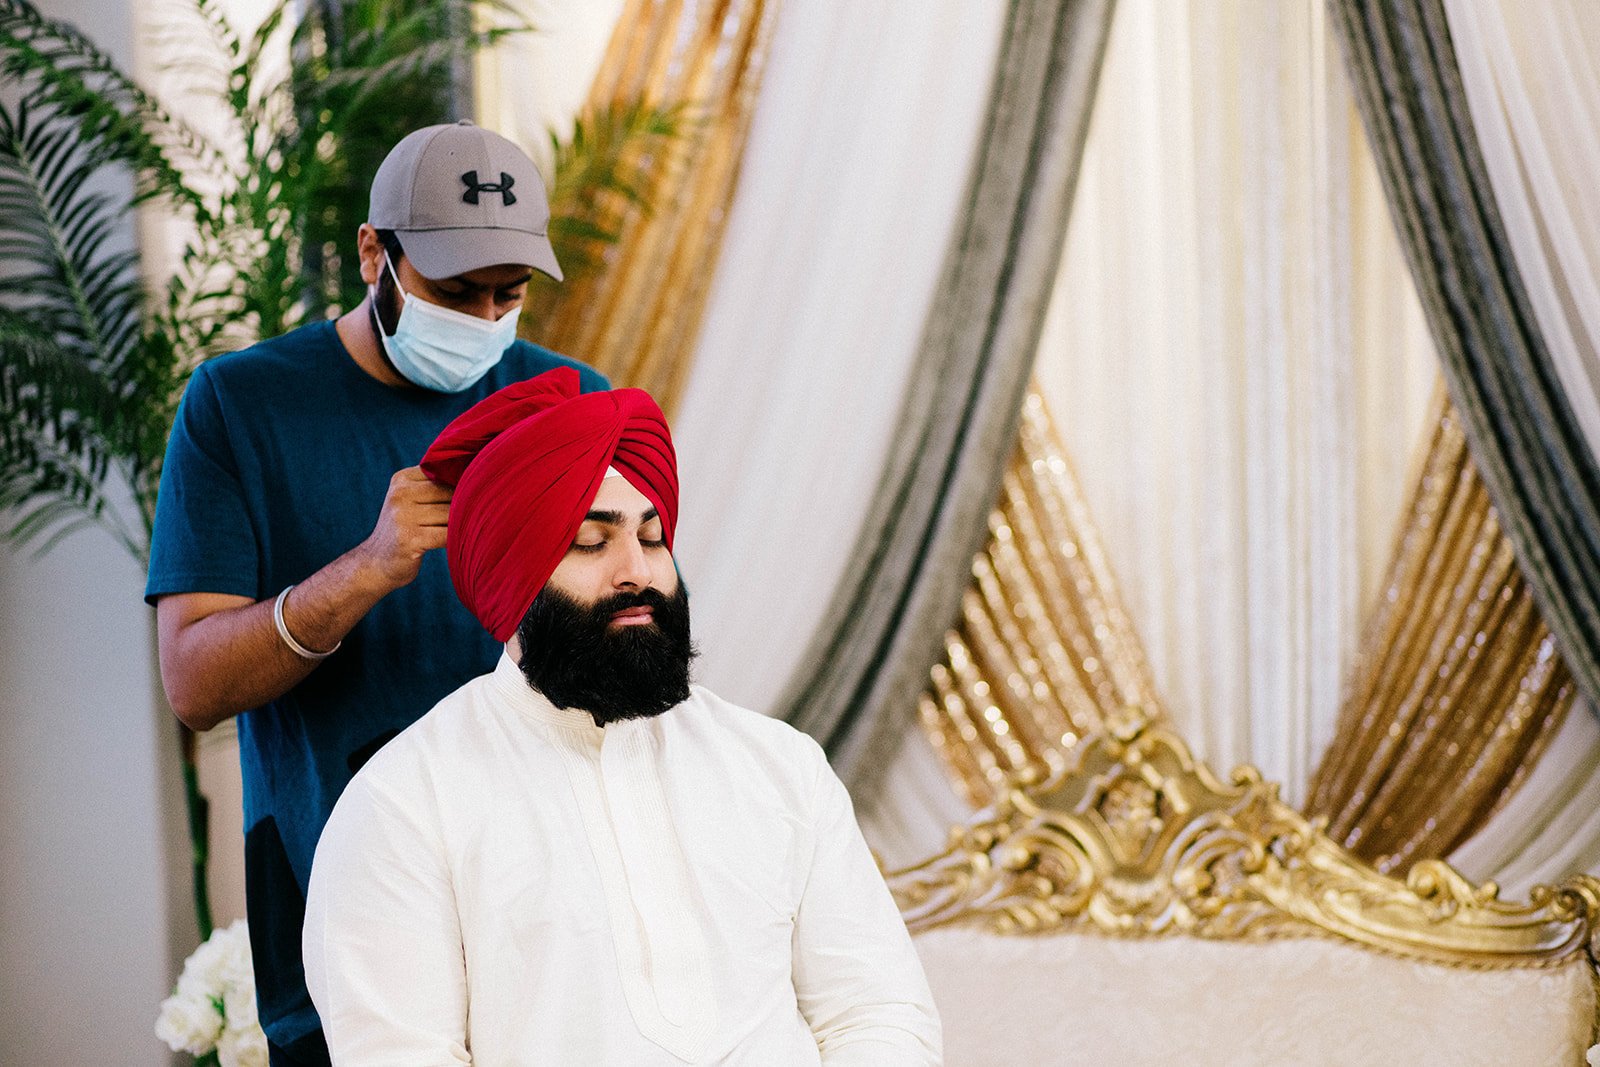 A south Asian groom has his red turban tied on his wedding morning